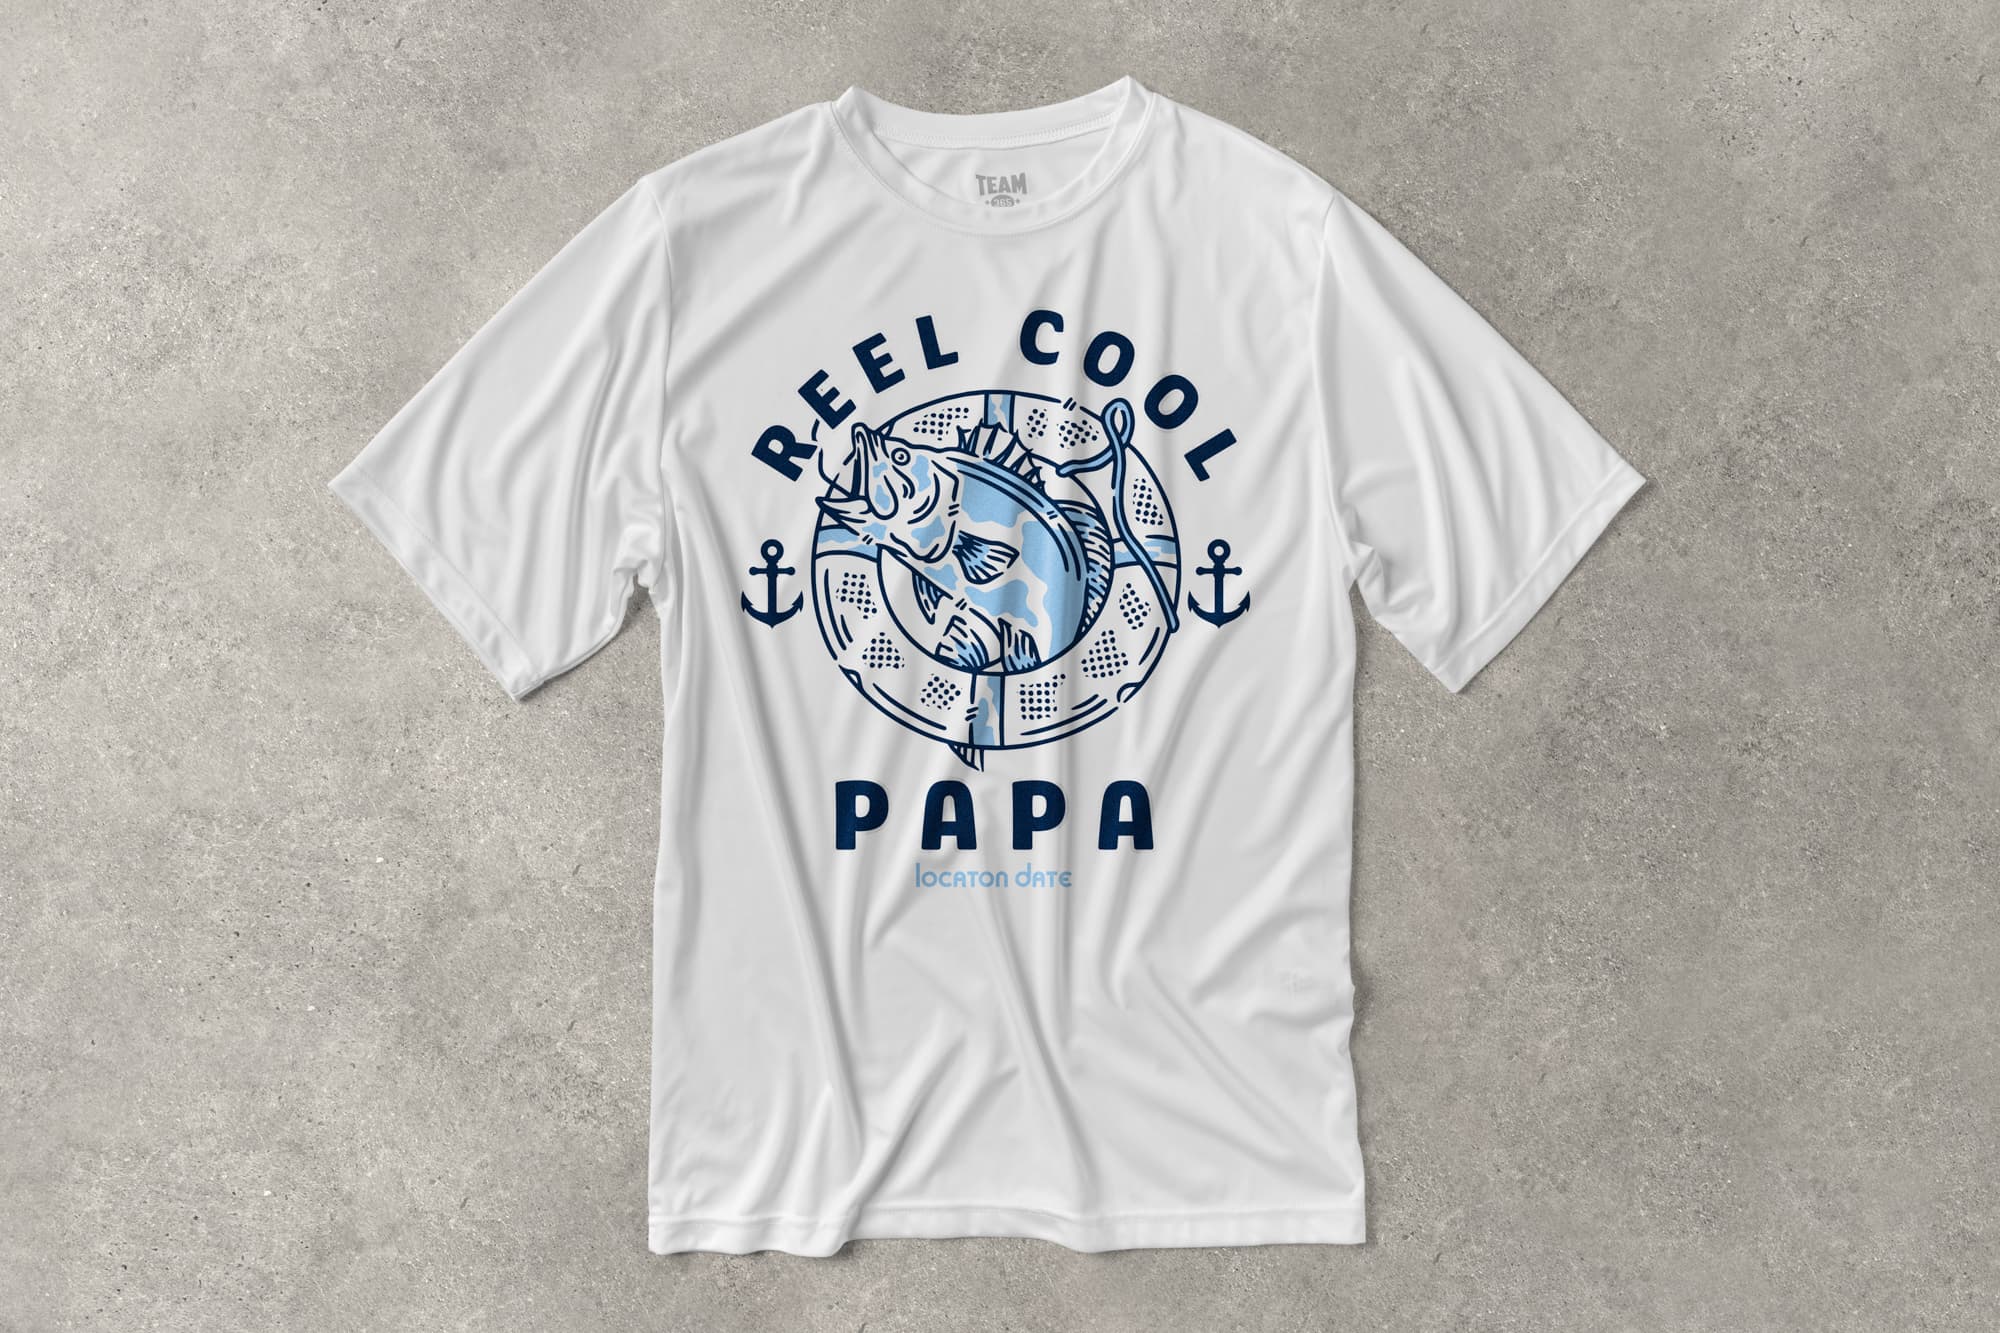 A flat performance t-shirt that has a customizable design that says "Reel cool Papa" and features a fish design